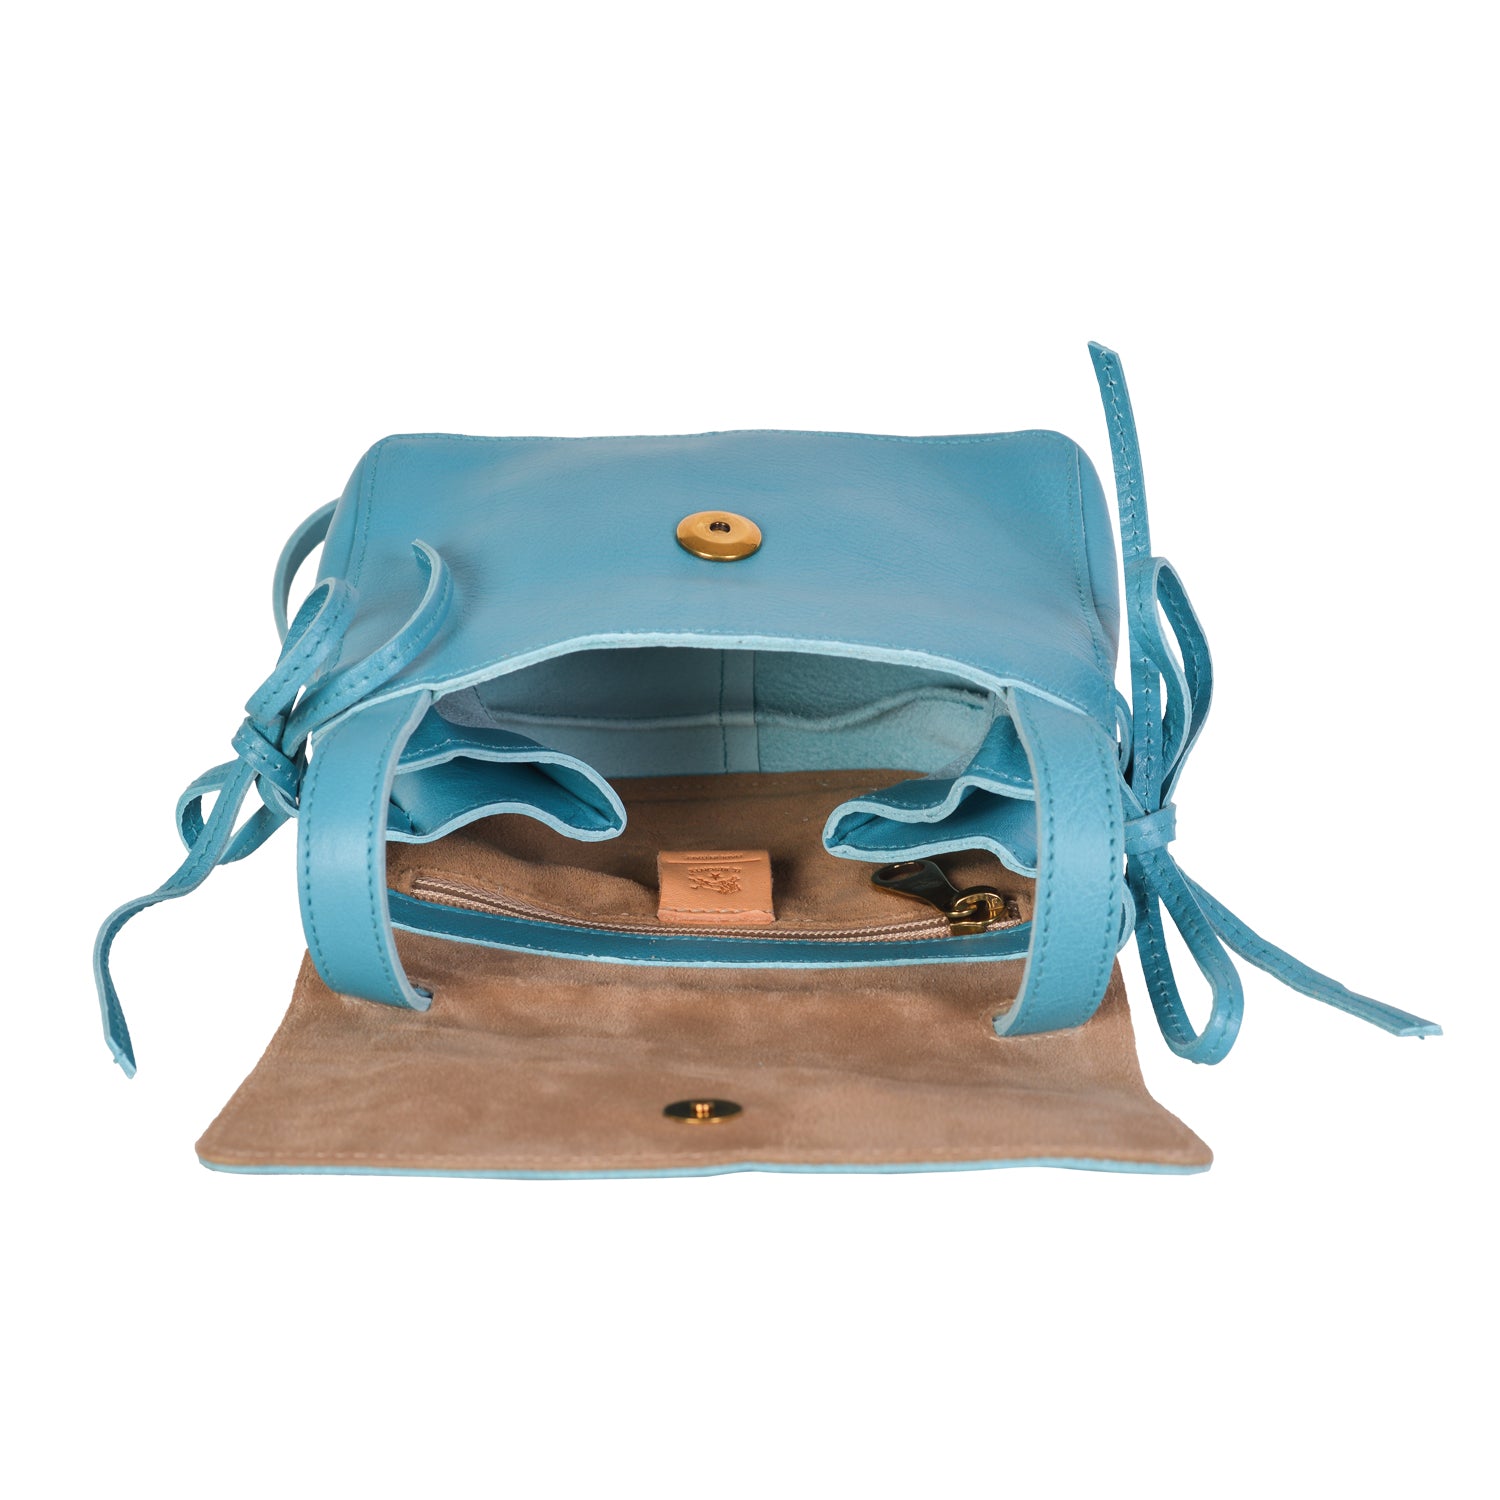 NEW IL BISONTE WOMEN'S SOFFIETTO COLLECTION CROSSBODY BAG IN TURQUOISE LEATHER